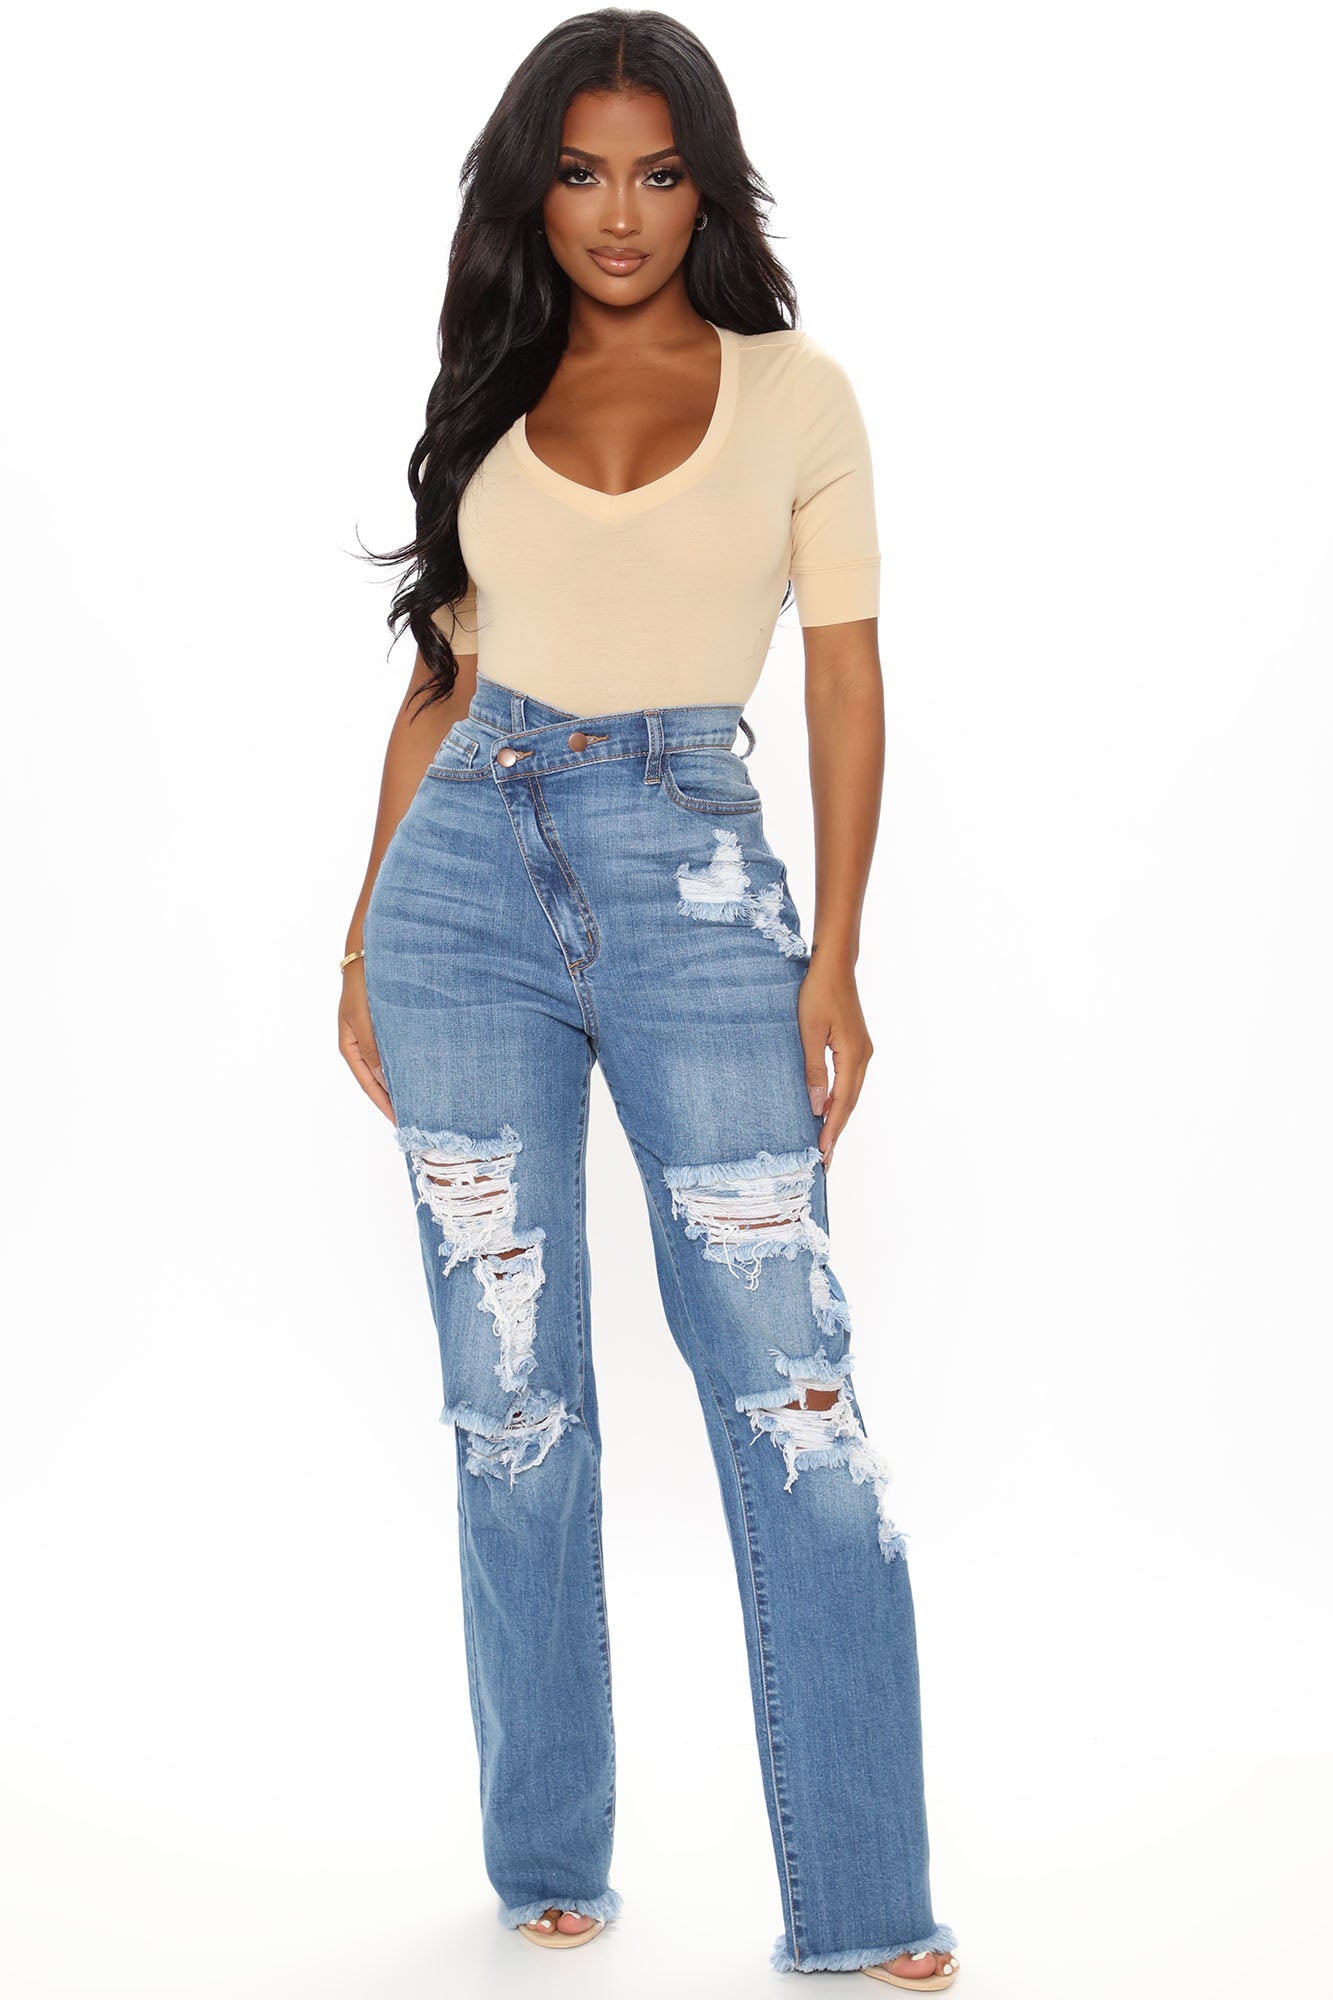 Don't Get Crossed Over Slouch Fit Jeans - Medium Blue Wash, Fashion Nova,  Jeans